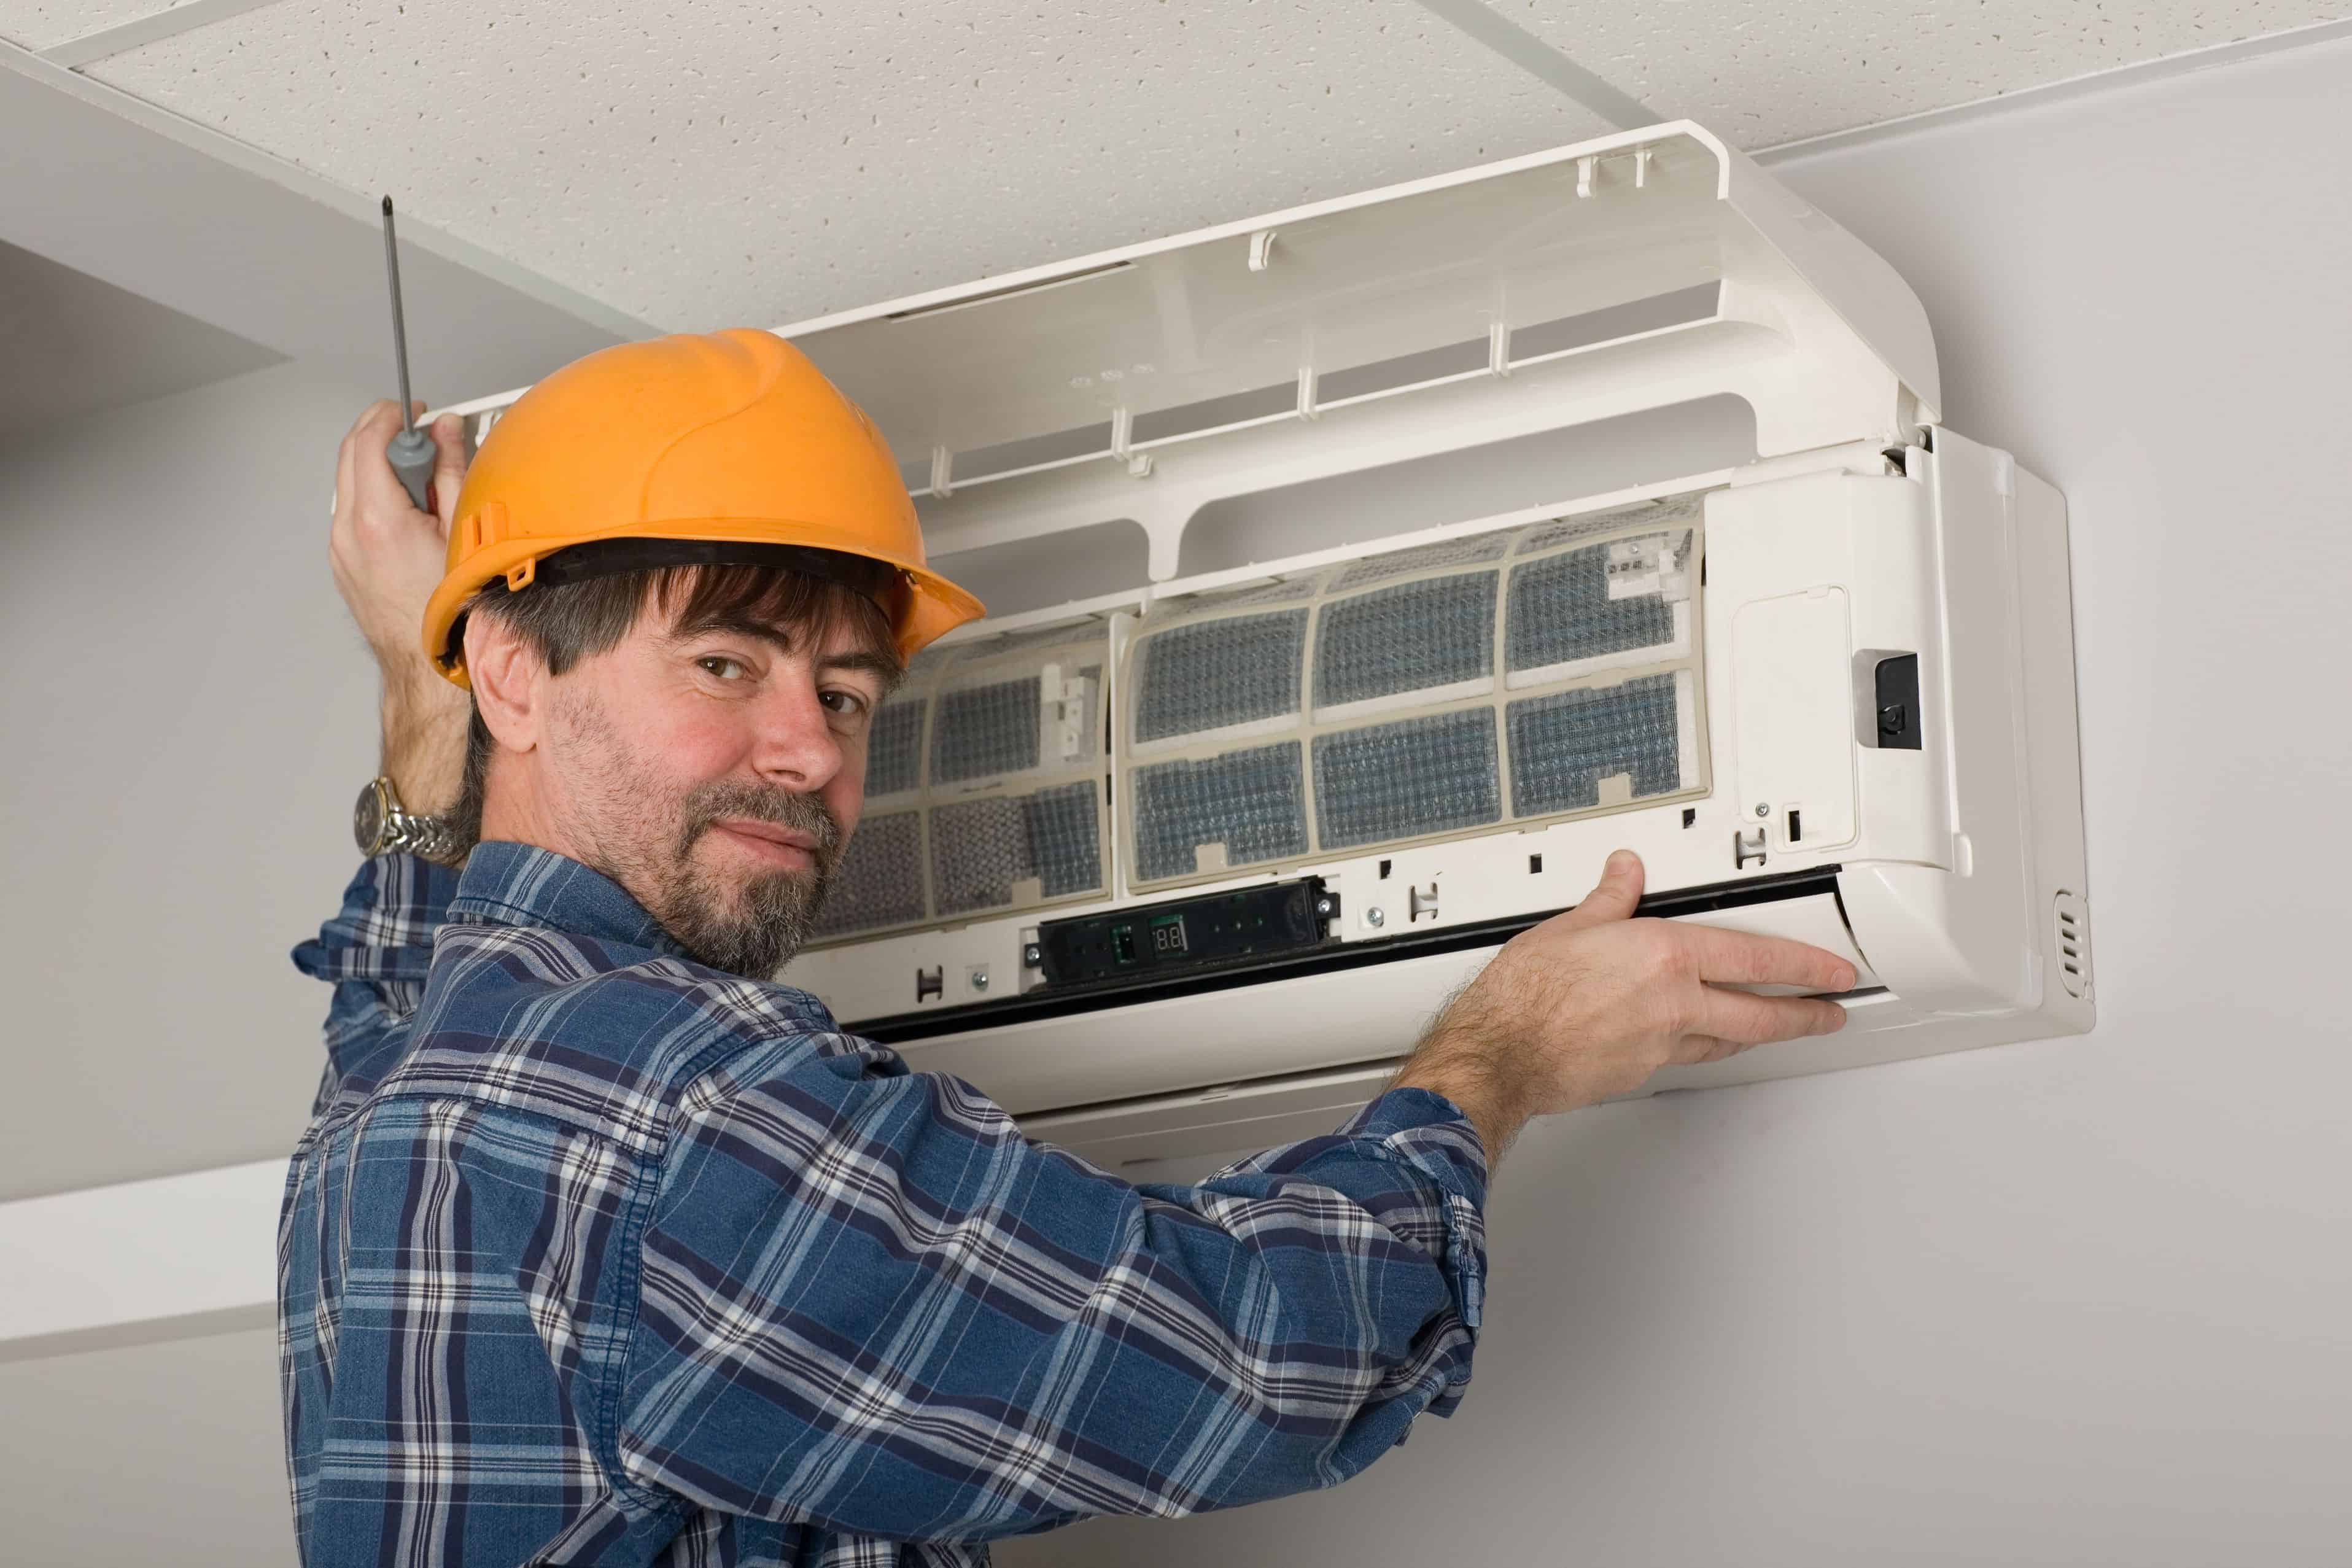 How To Fix an Air Conditioner? – The Housing Forum